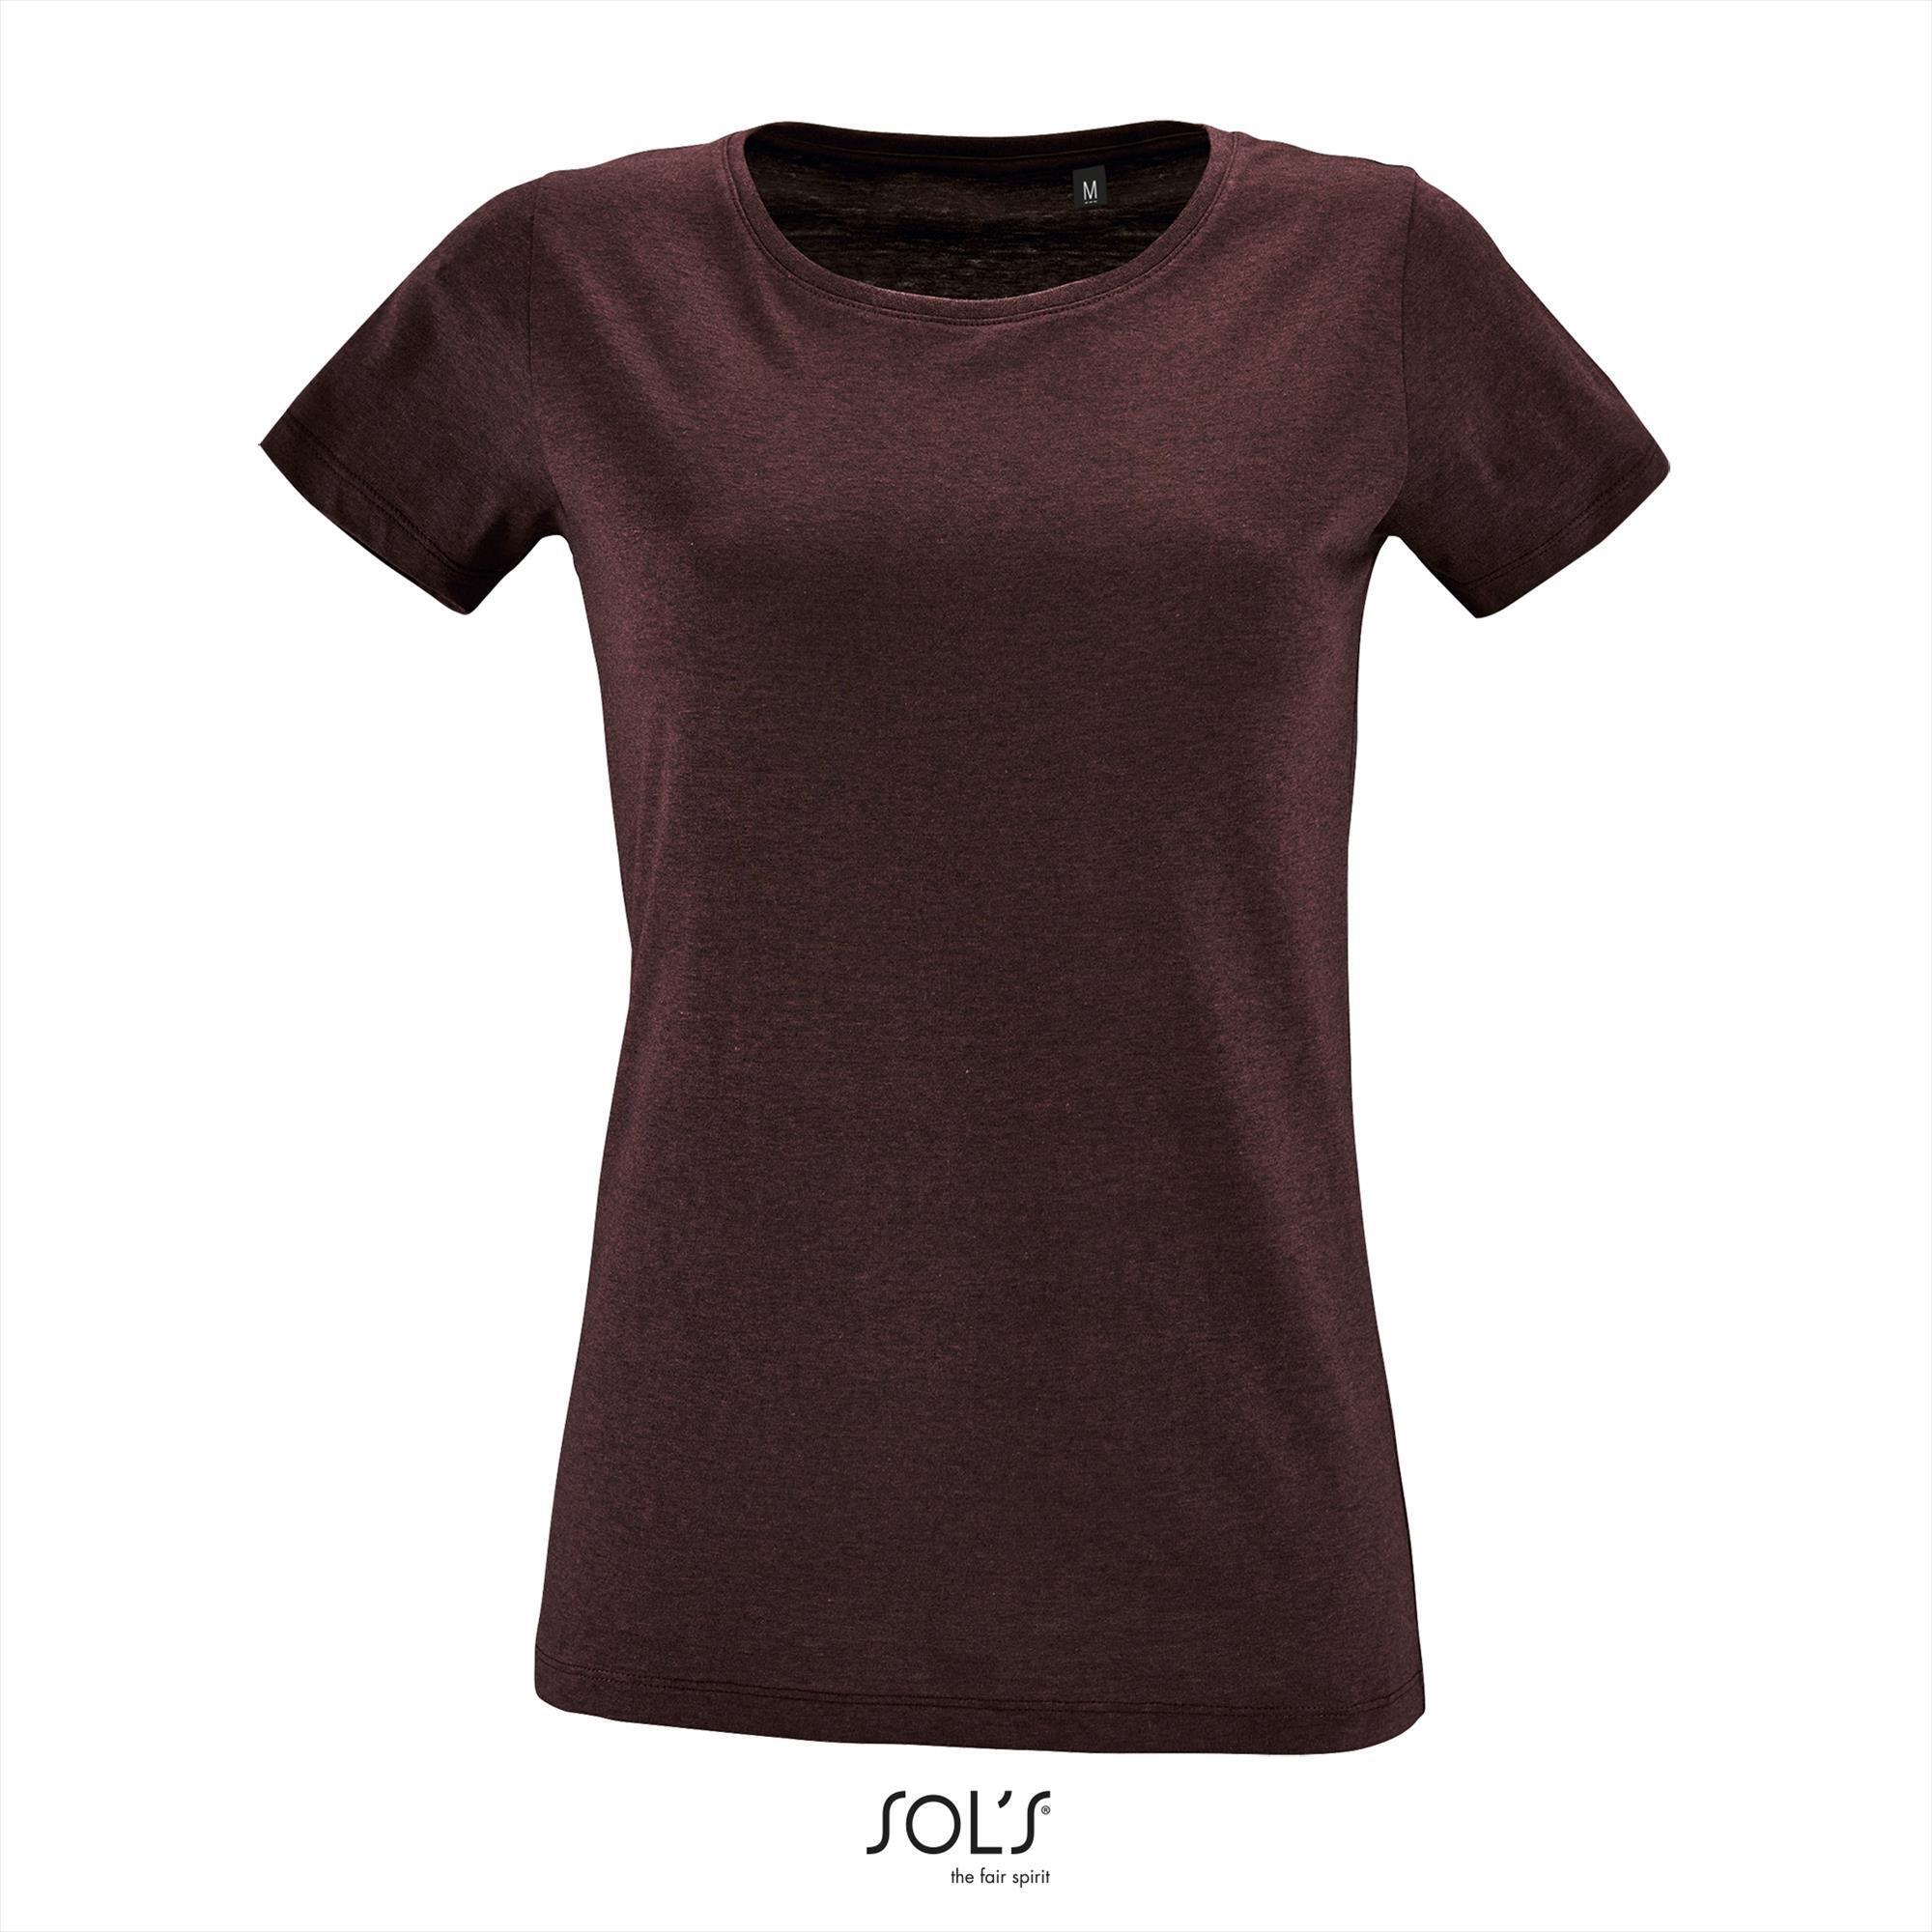 T-shirt Dames heather oxblood rood fitted met ronde hals